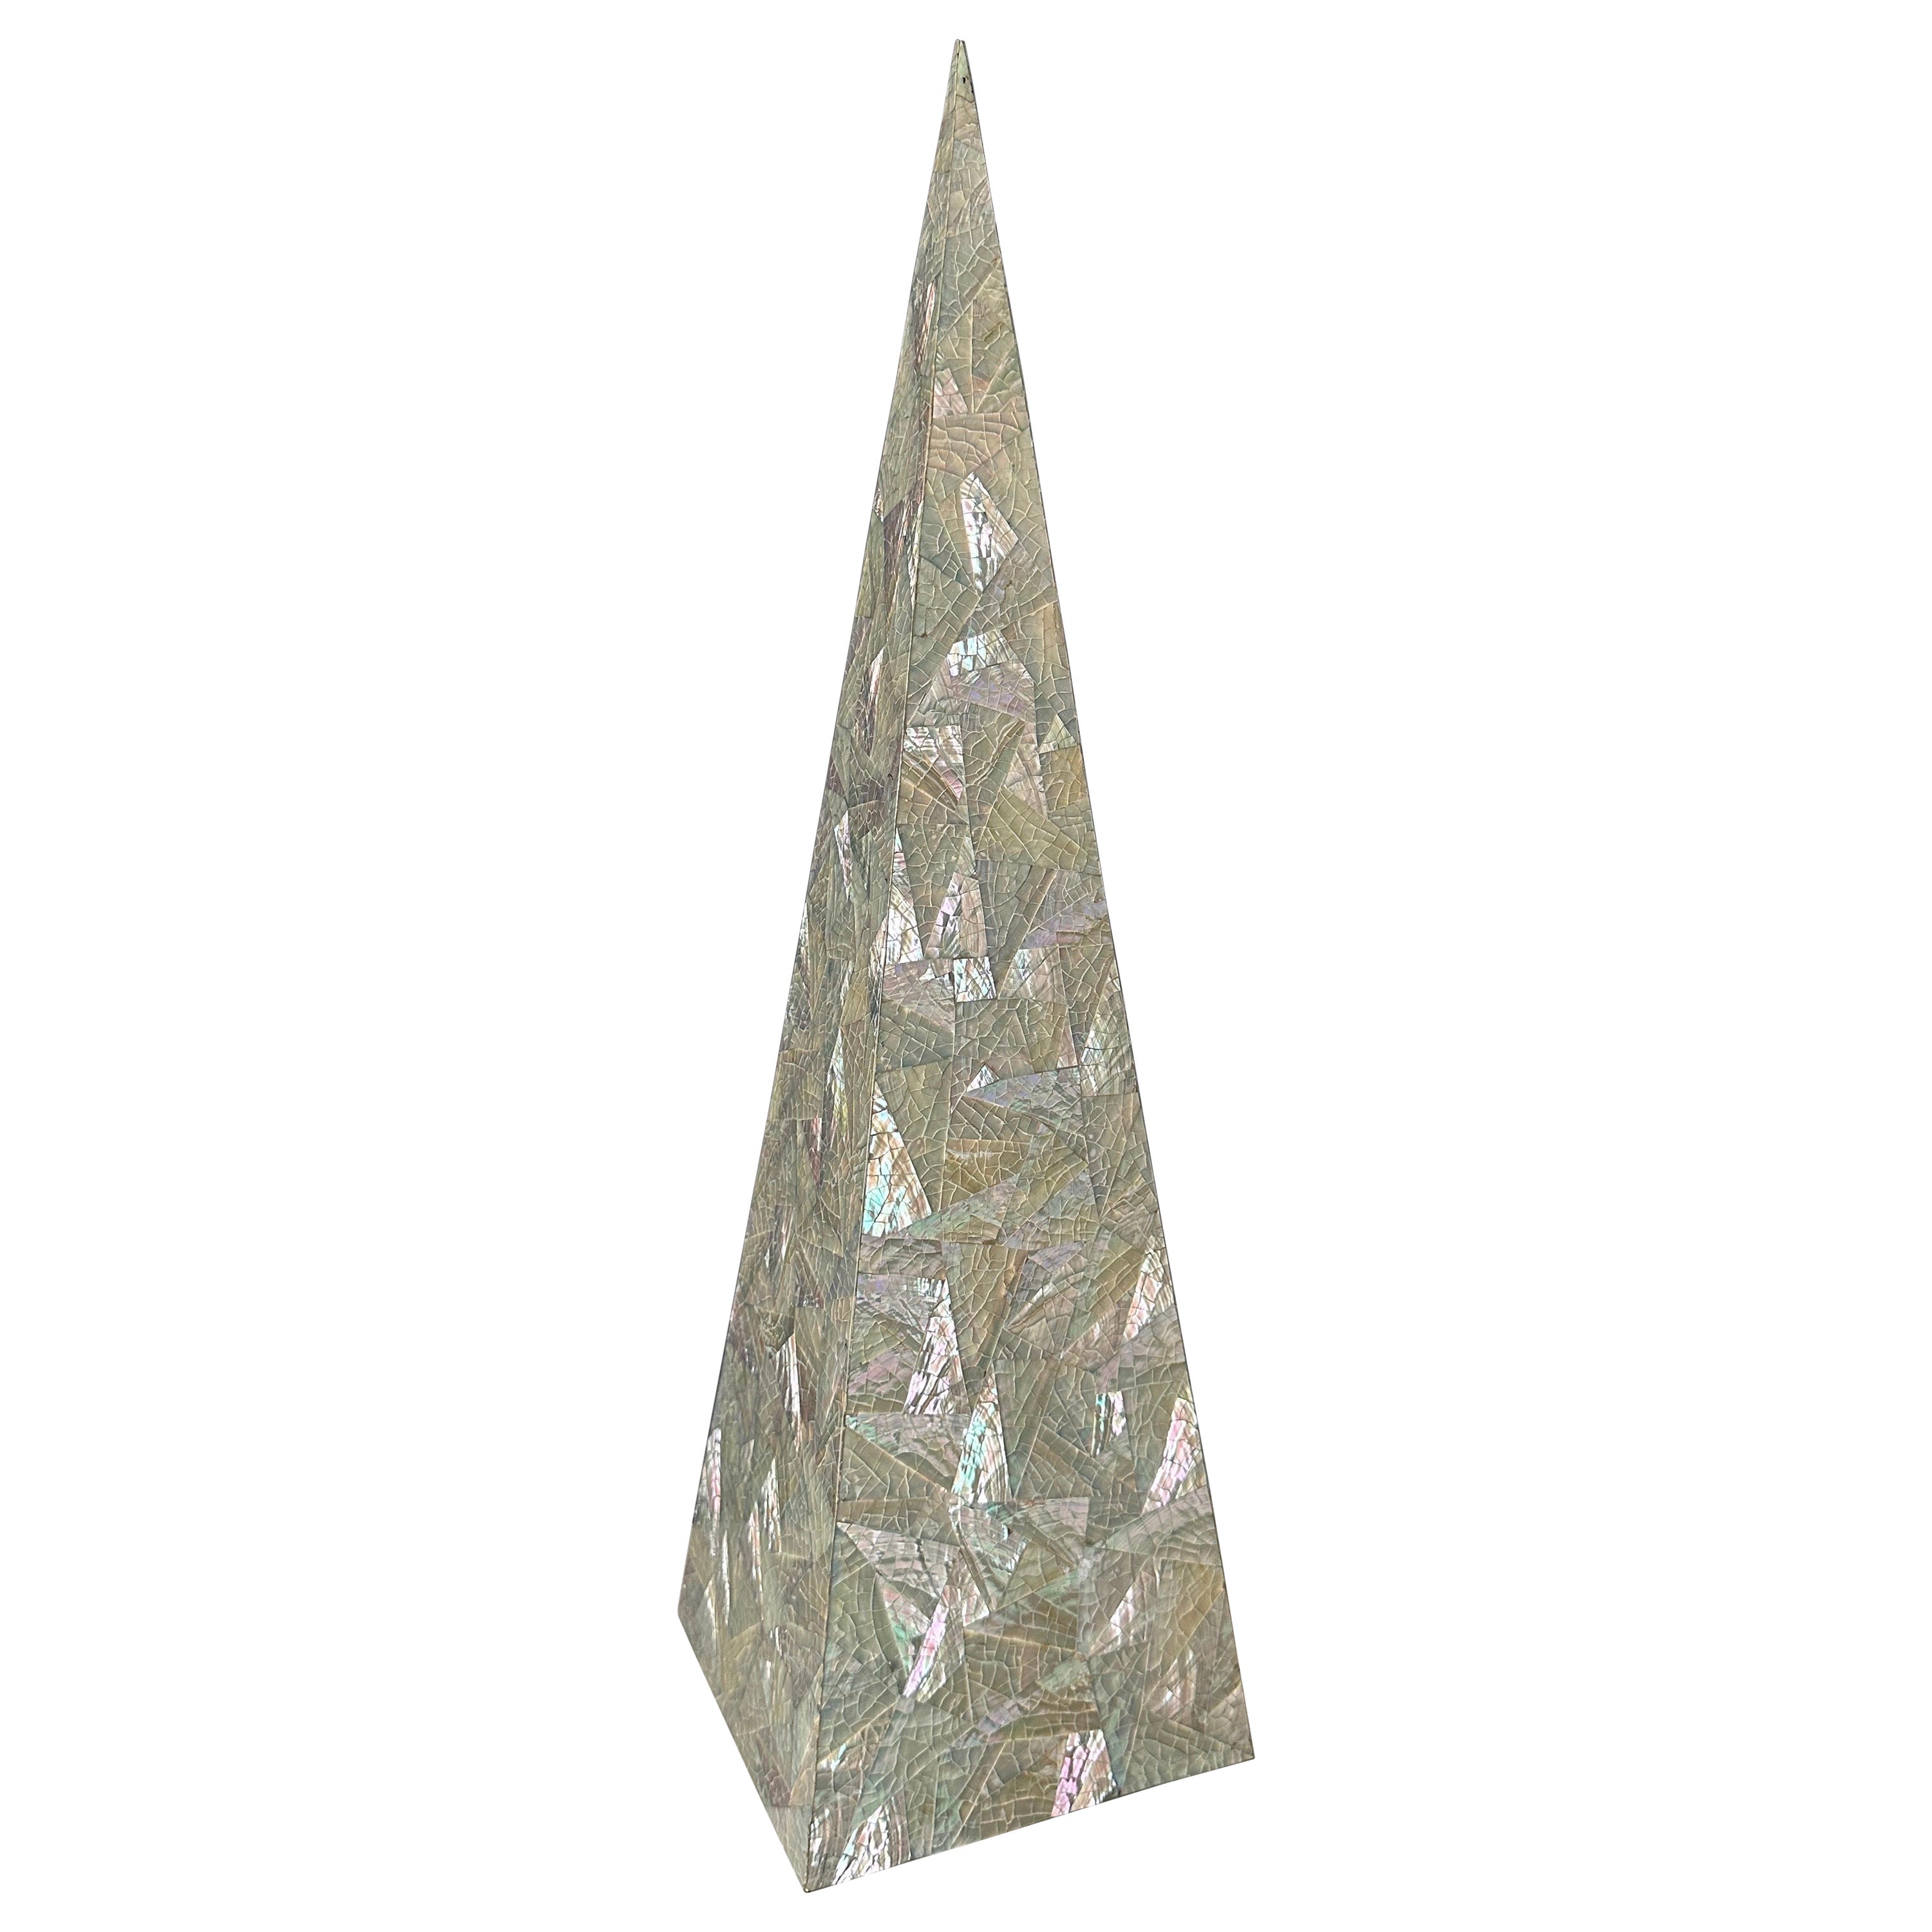 Tessellated Mother of Pearl Obelisk